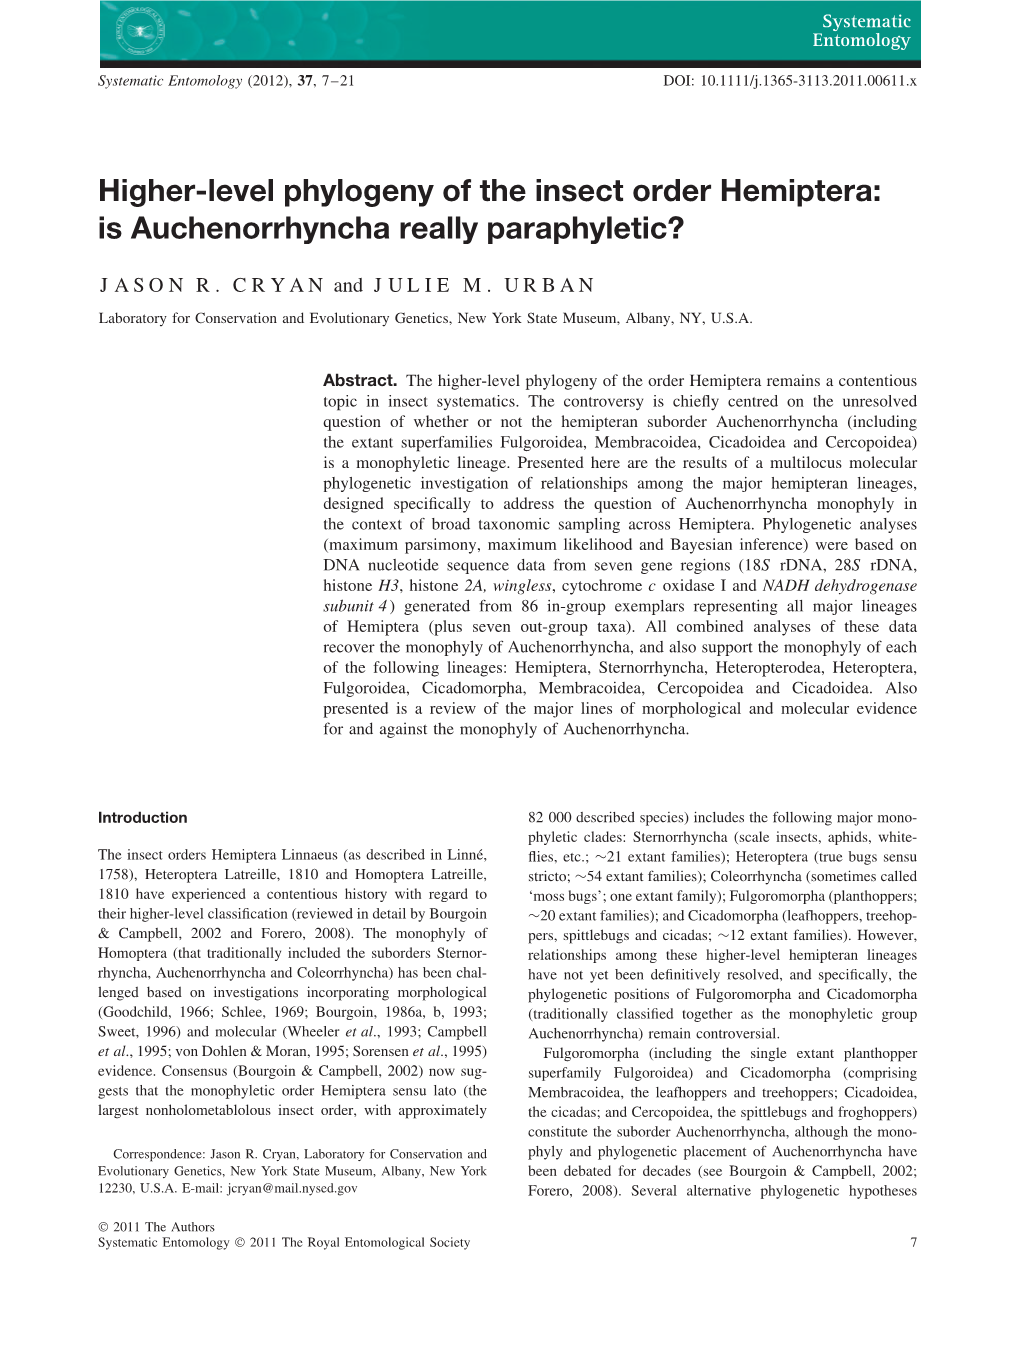 Higherlevel Phylogeny of the Insect Order Hemiptera: Is